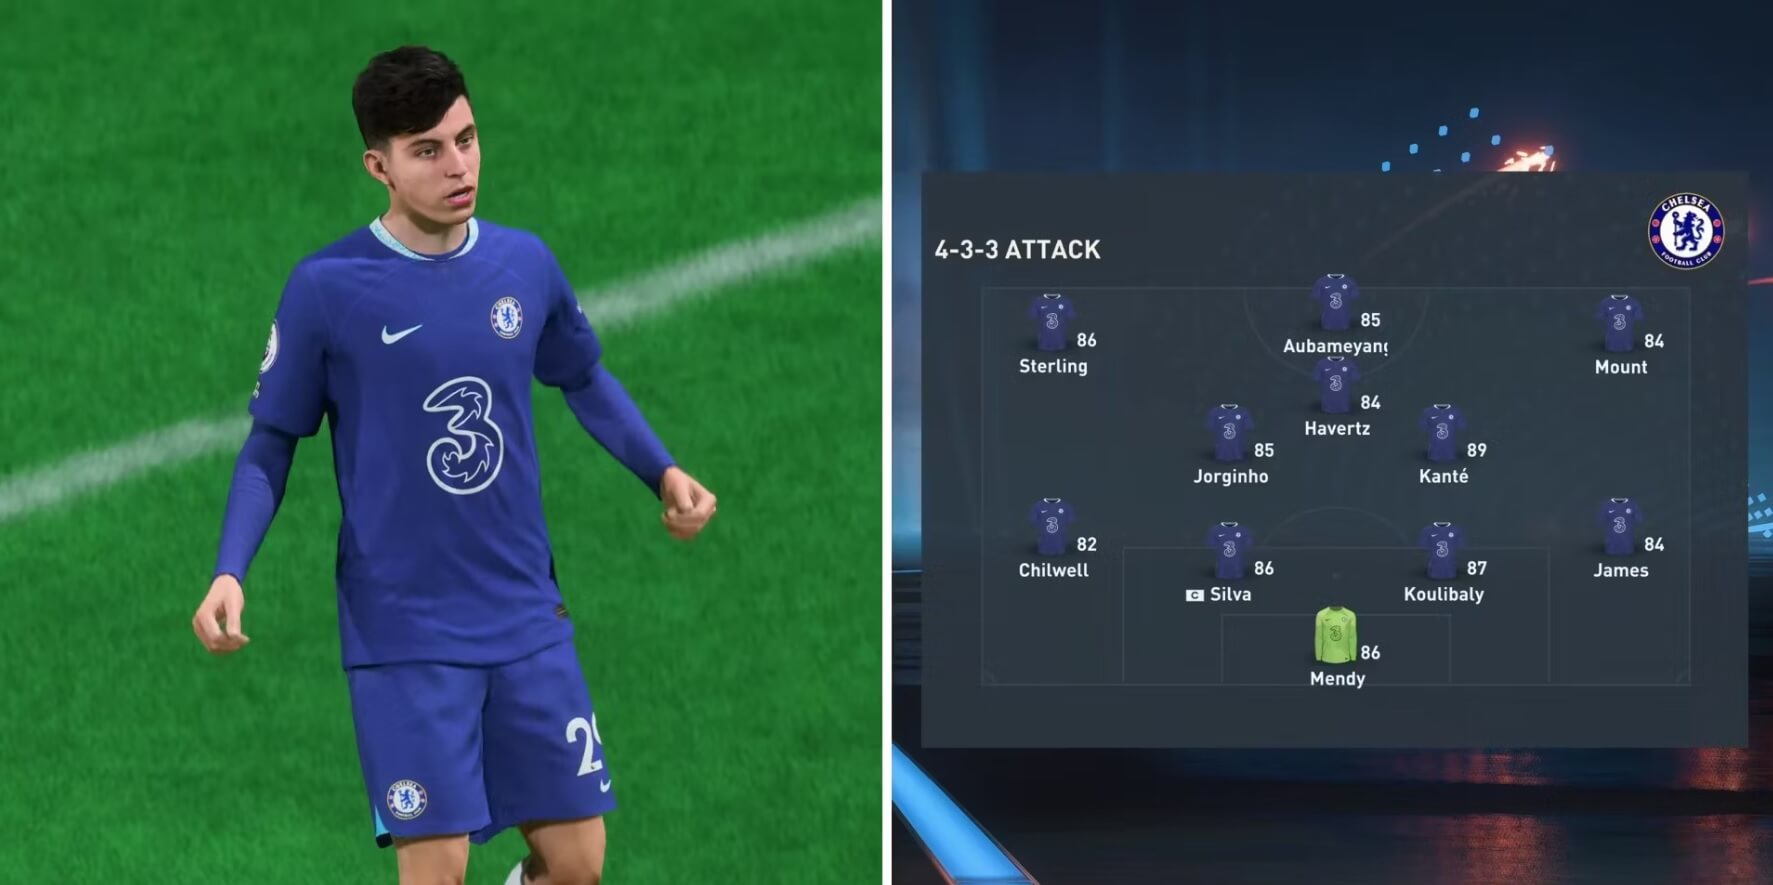 Chelsea starting lineup in FIFA 23